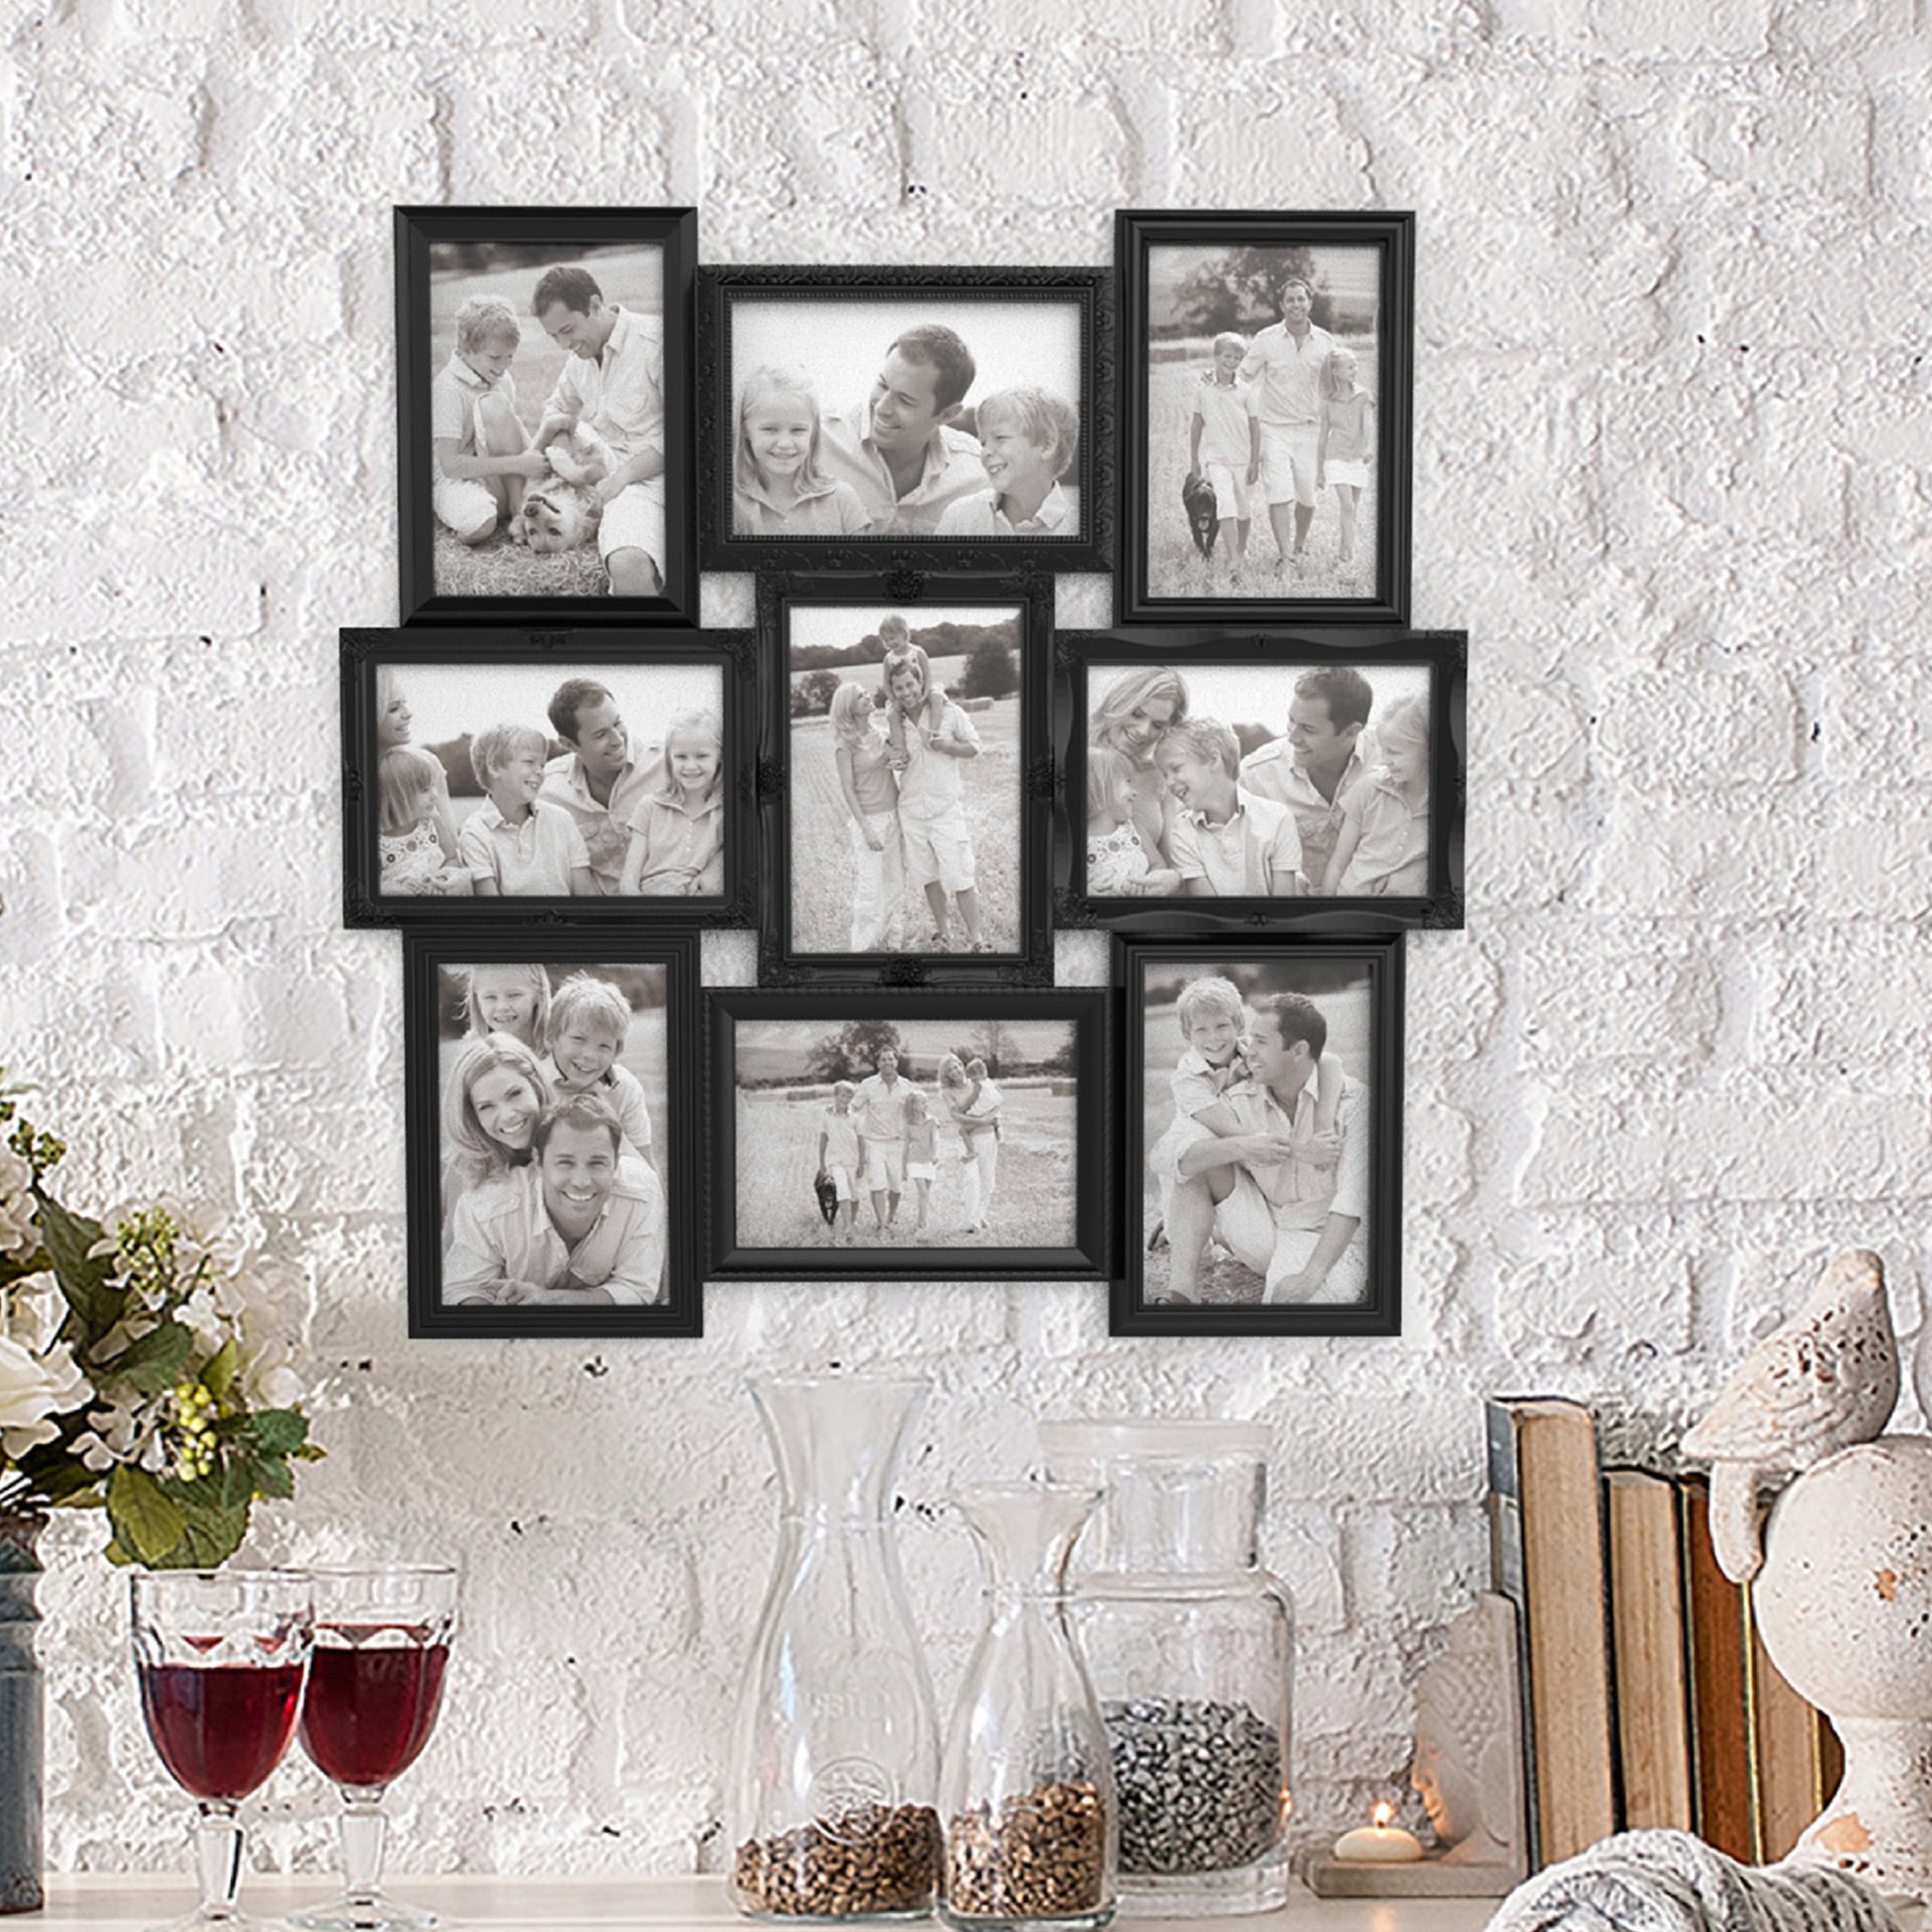 Lavish Home Collage Picture Frame with 9 Openings for 4x6 Photos Wall Hanging Multiple Photo